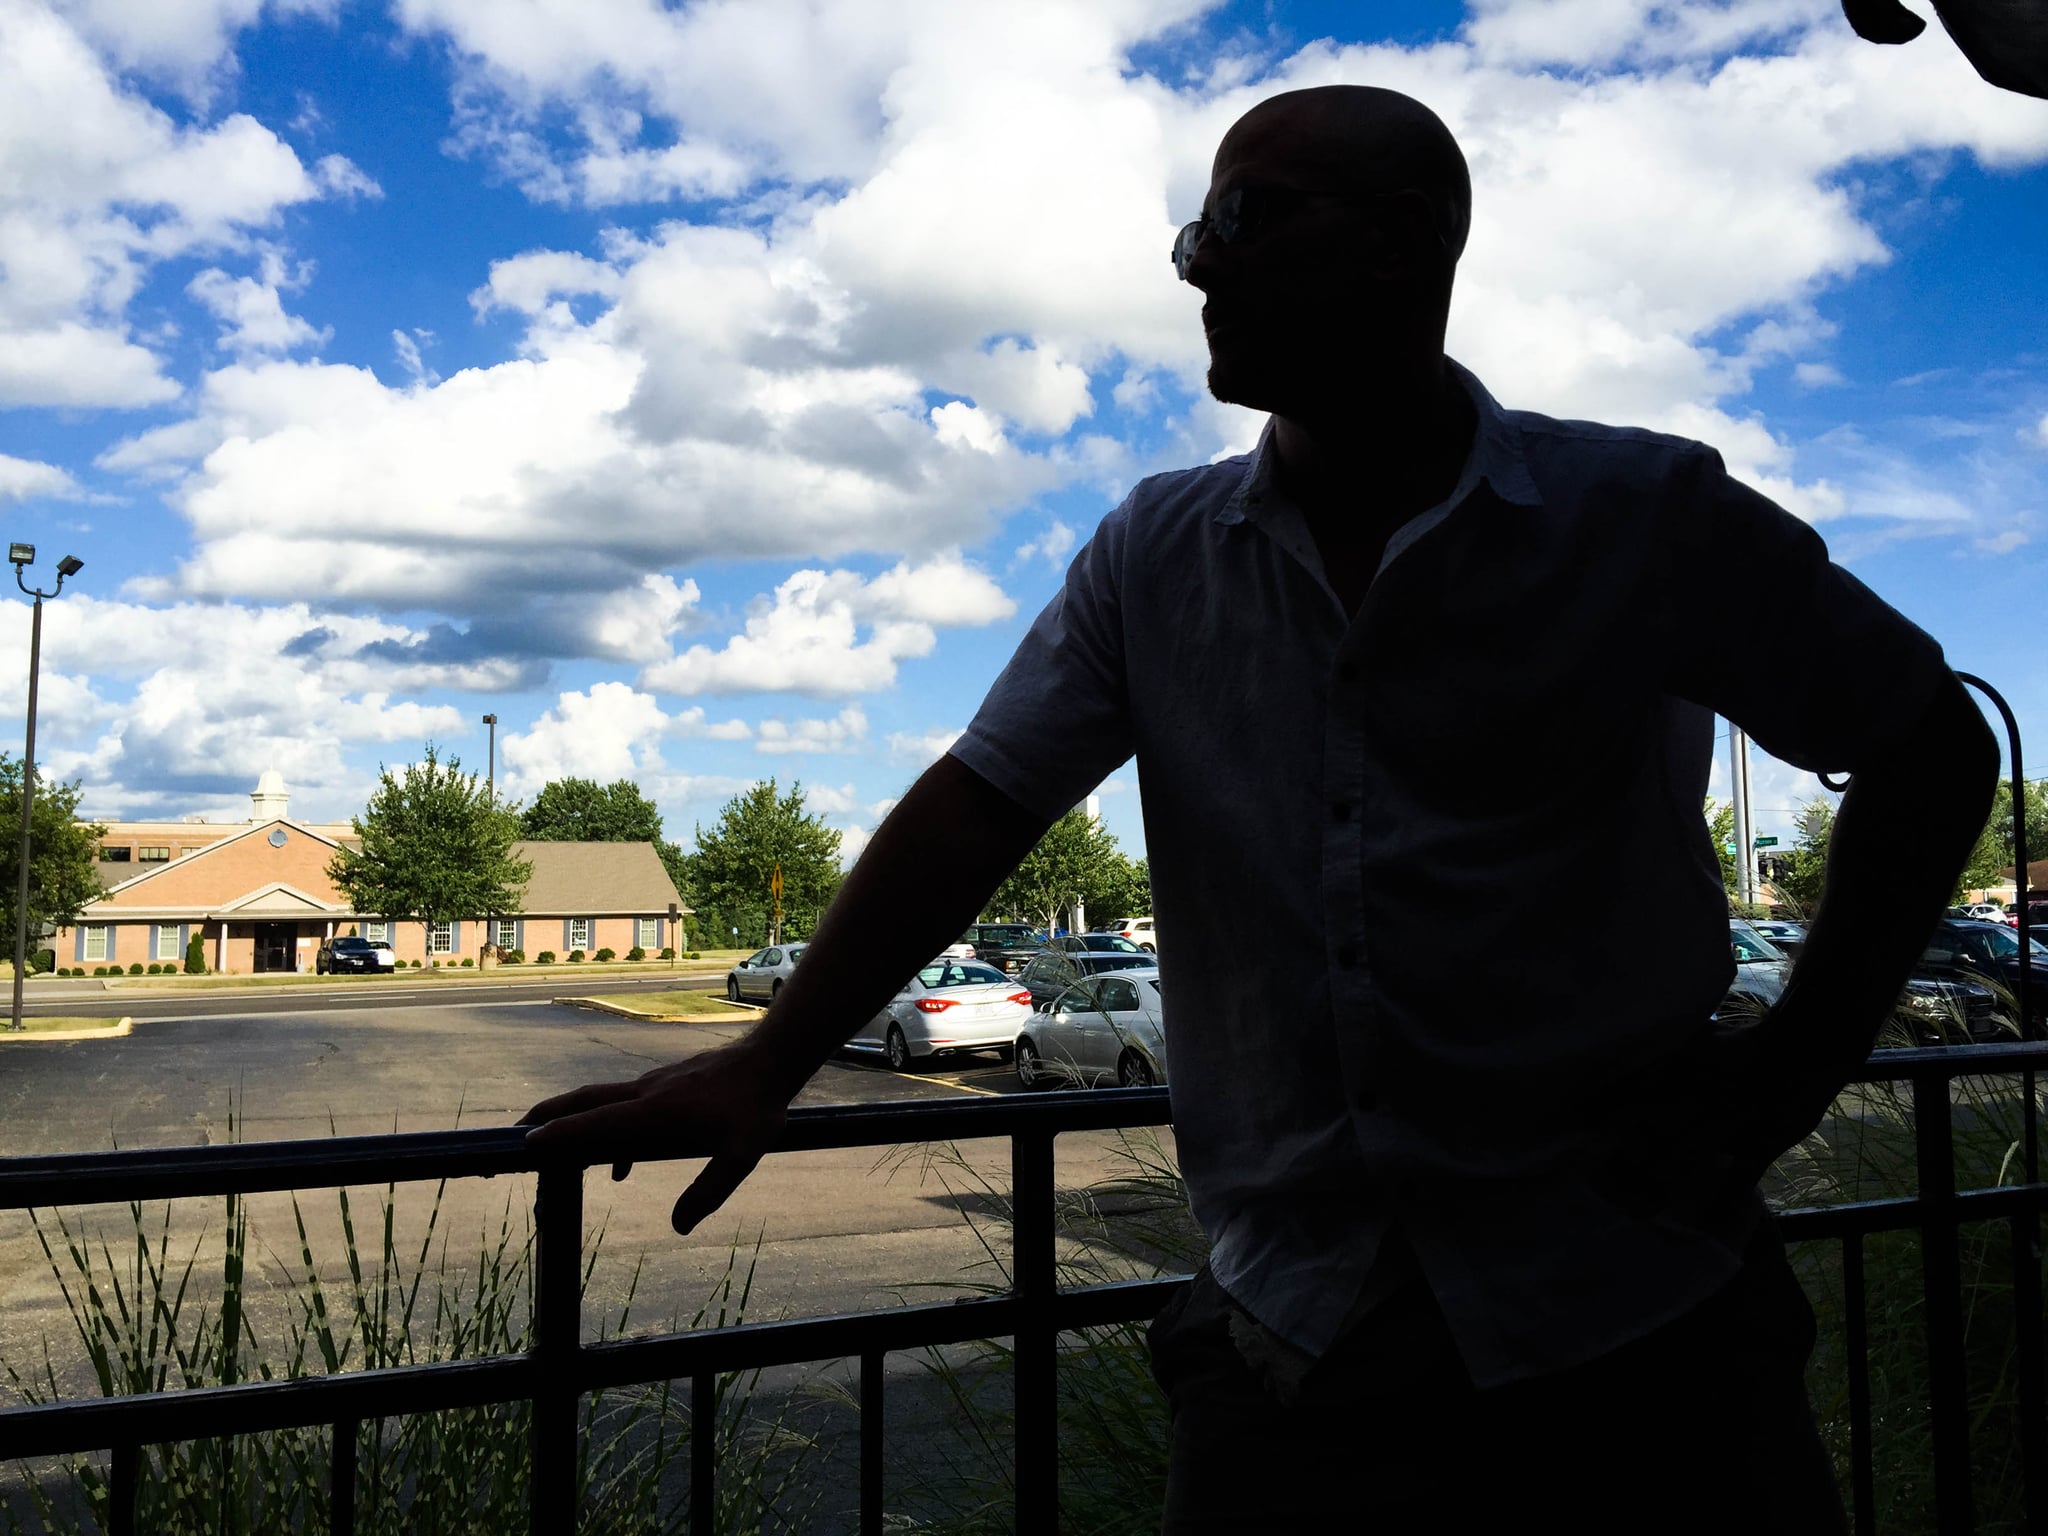 *Andrew, 37, looks out from the patio at a restaurant in Canton, Ohio on Aug. 18. (Photo by Stephanie Haney)